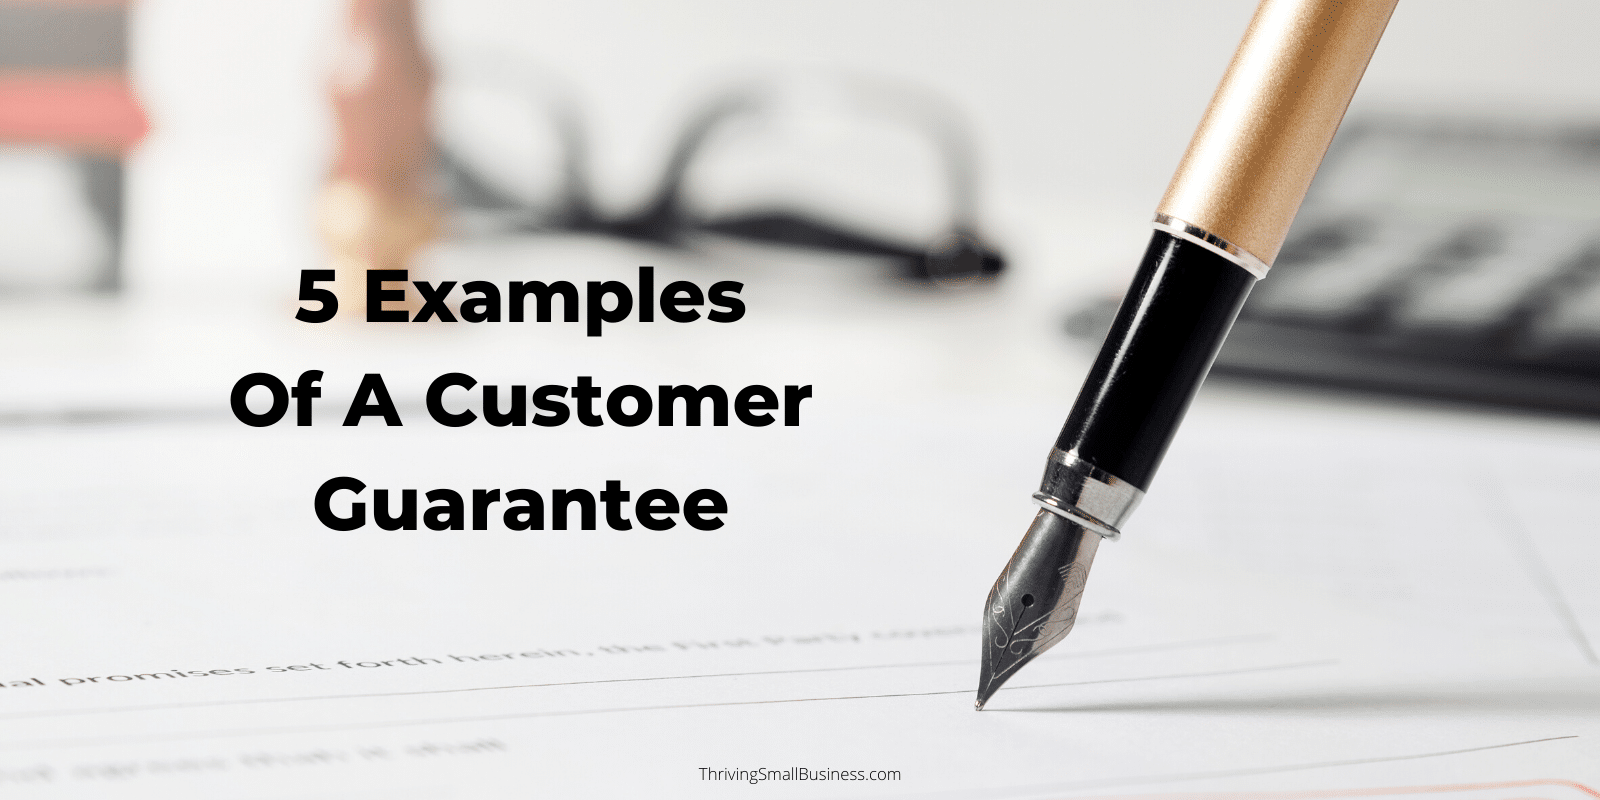 5 Examples Of A Customer Guarantee The Thriving Small Business